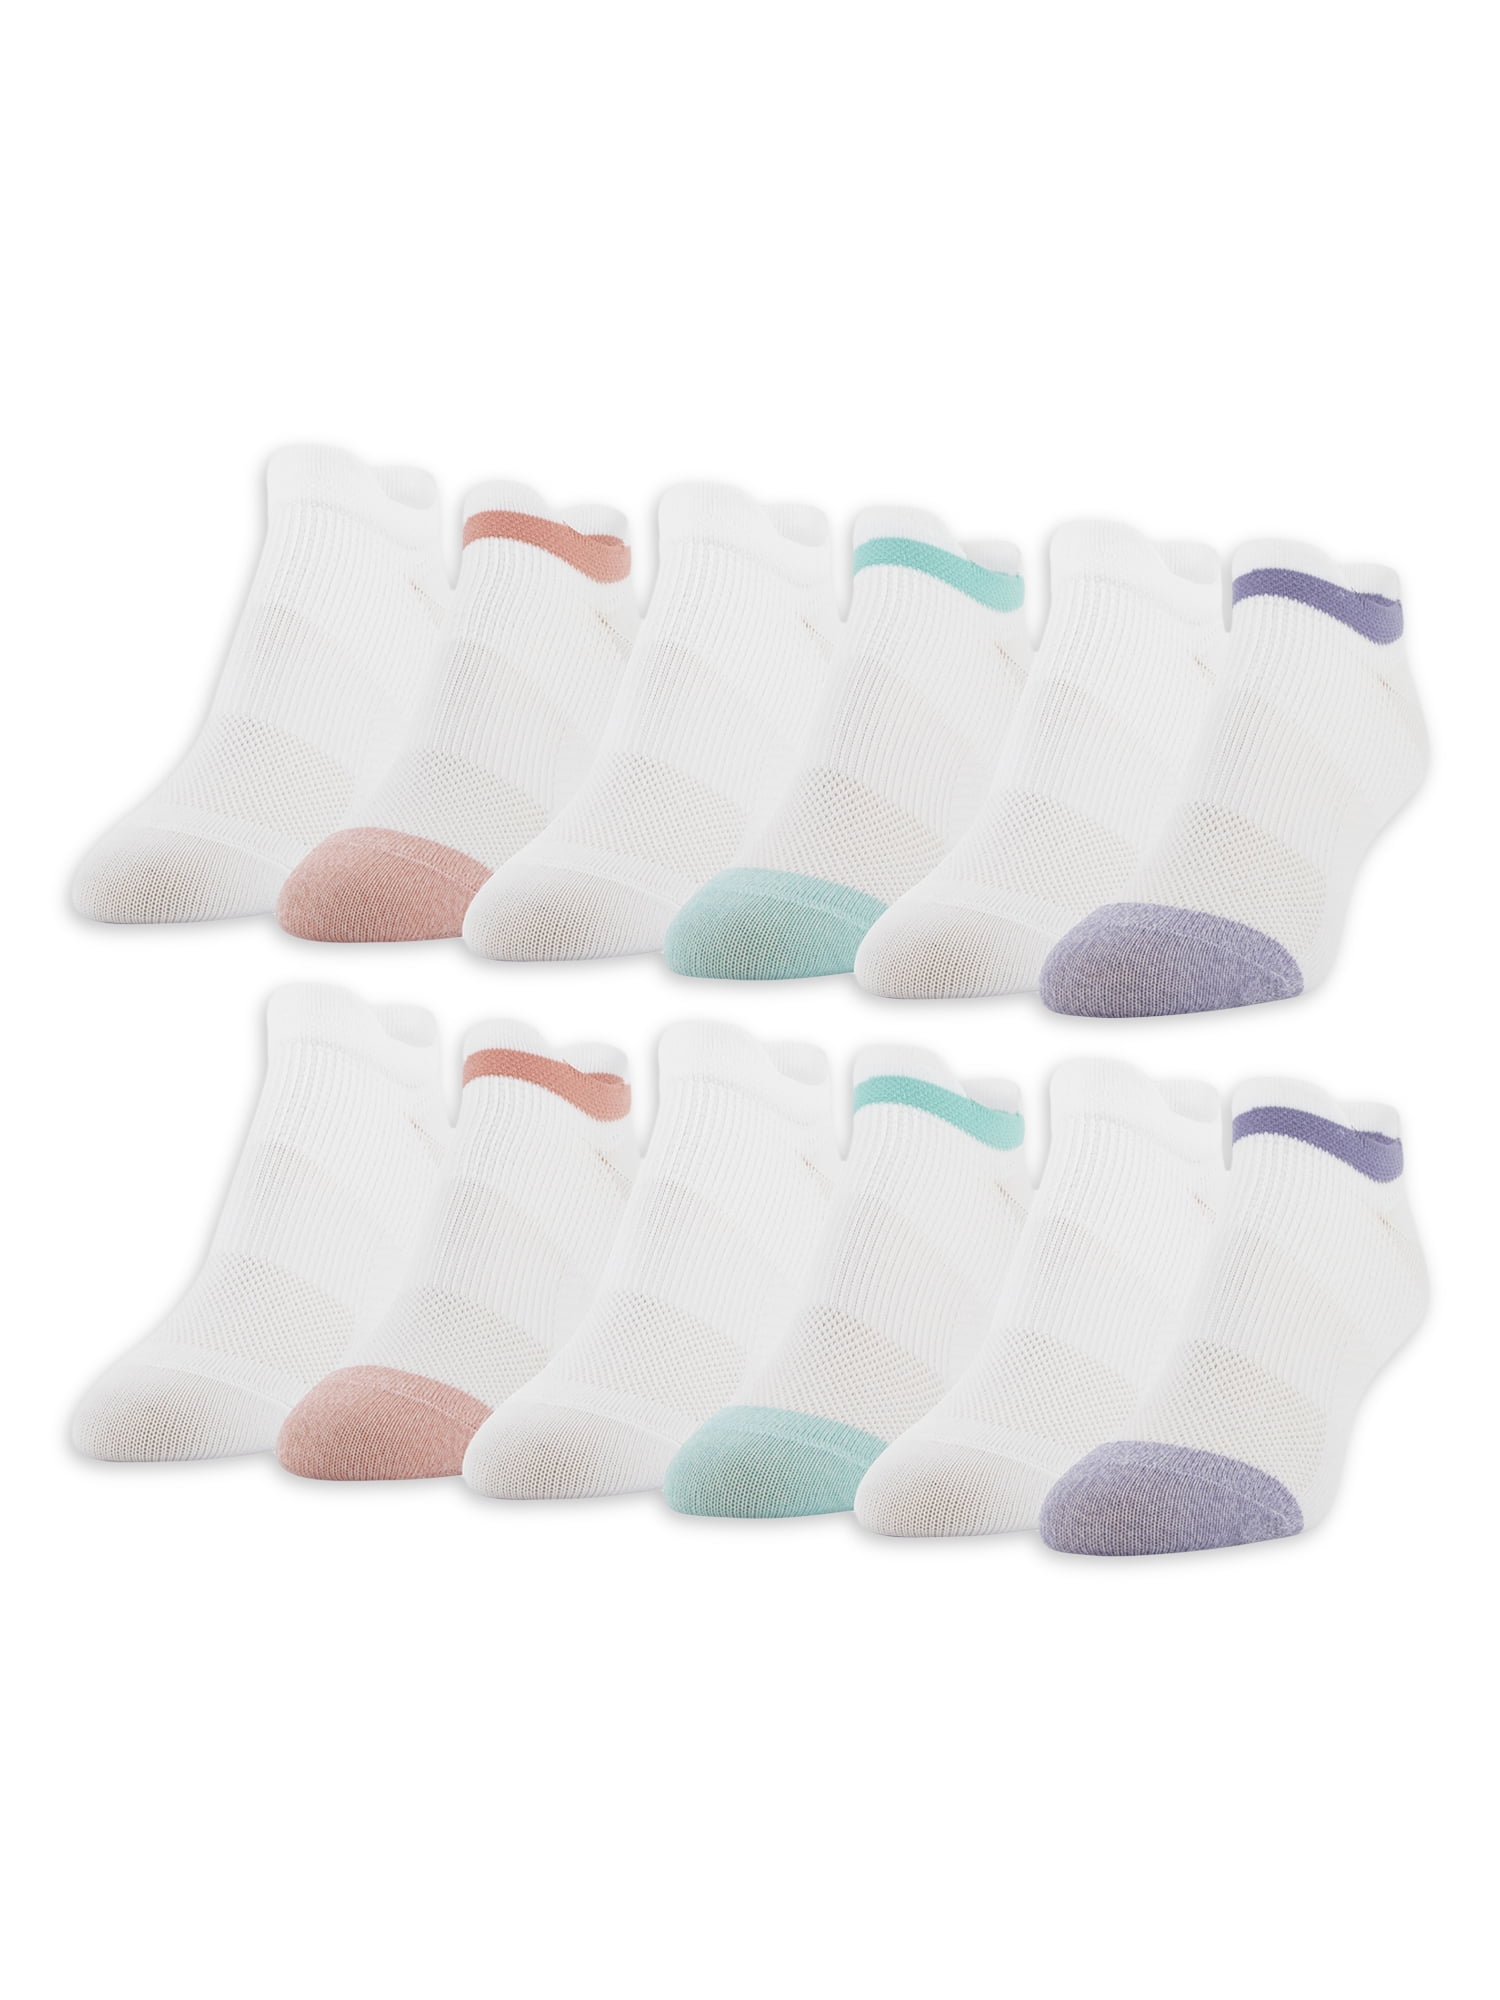 PEDS Womens All Day Active No Show Socks with Double Tabs, 12 Pairs ...